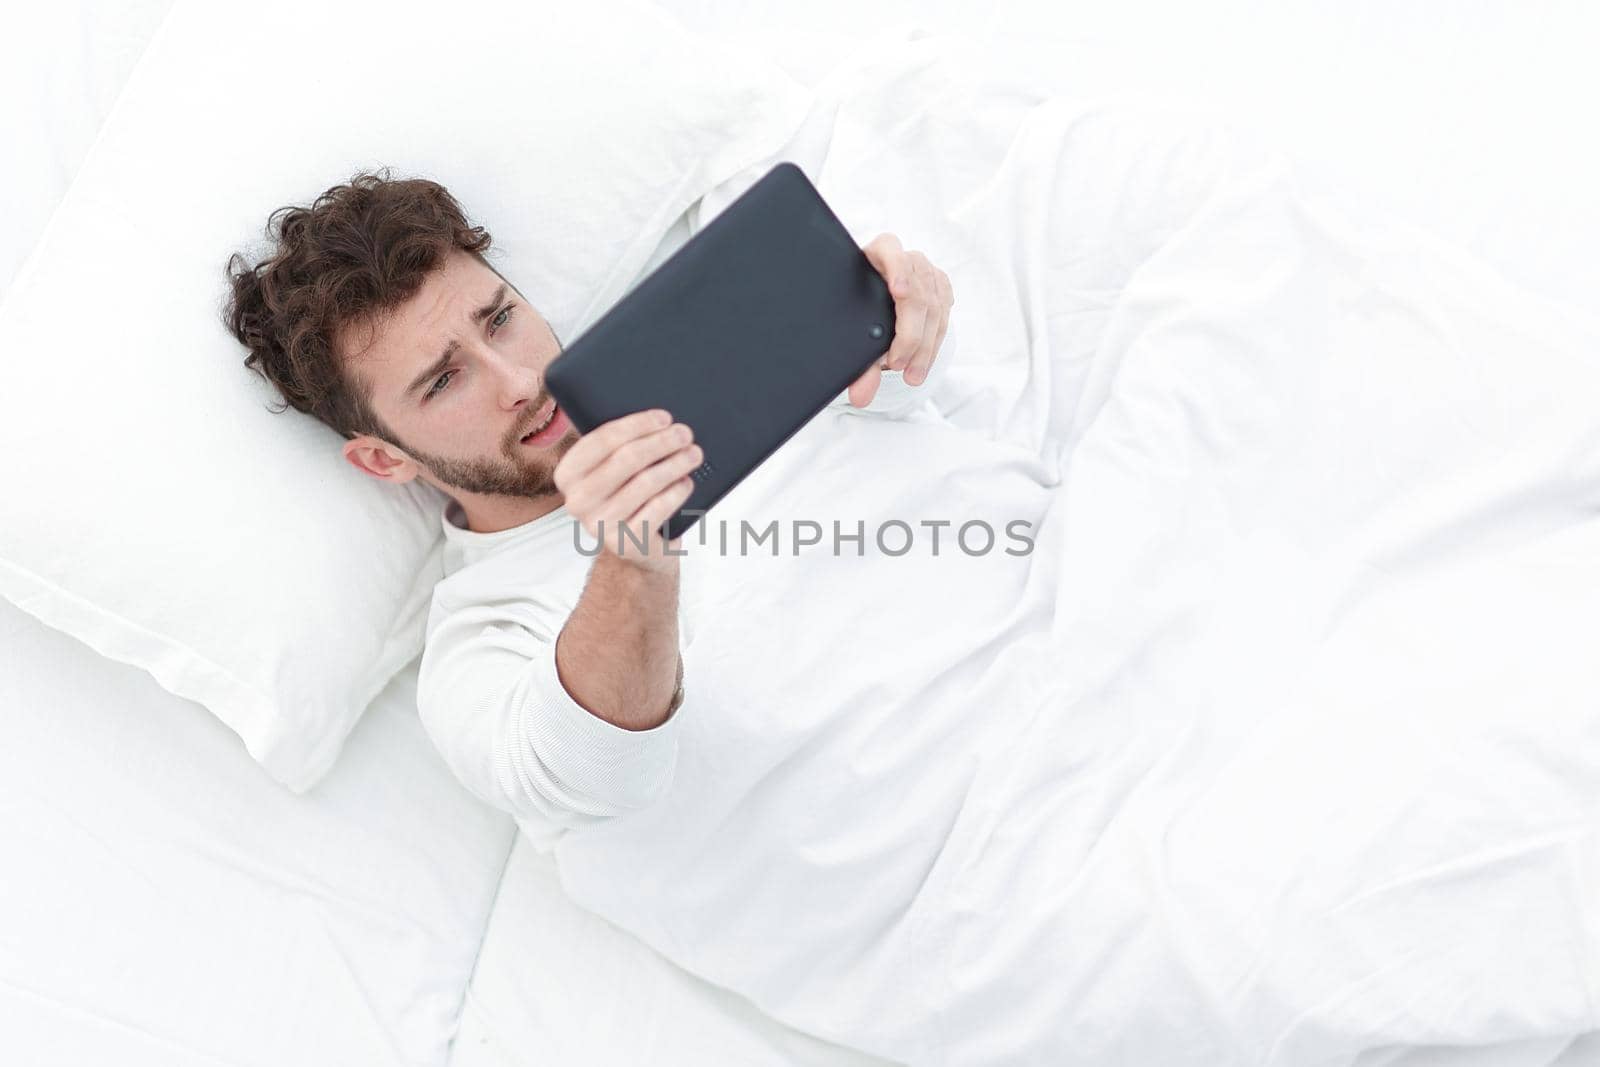 background image . man reading on digital tablet. photo with copy space.